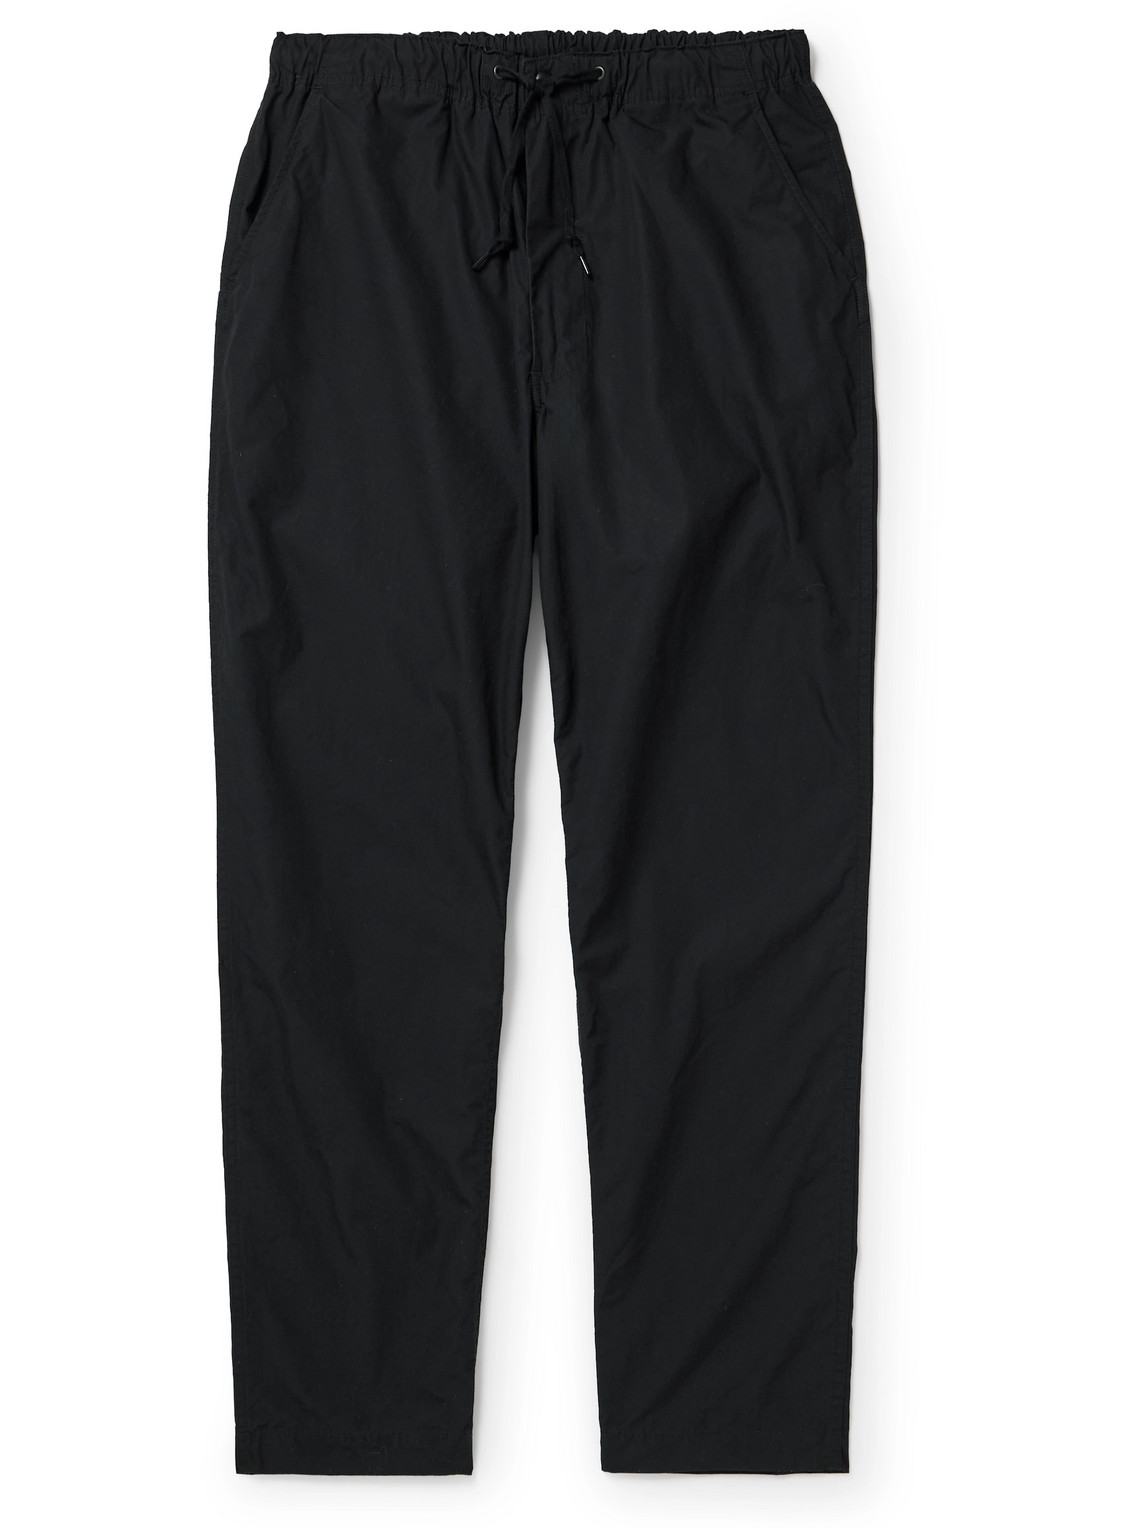 New Yorker Tapered Cotton Drawstring Trousers